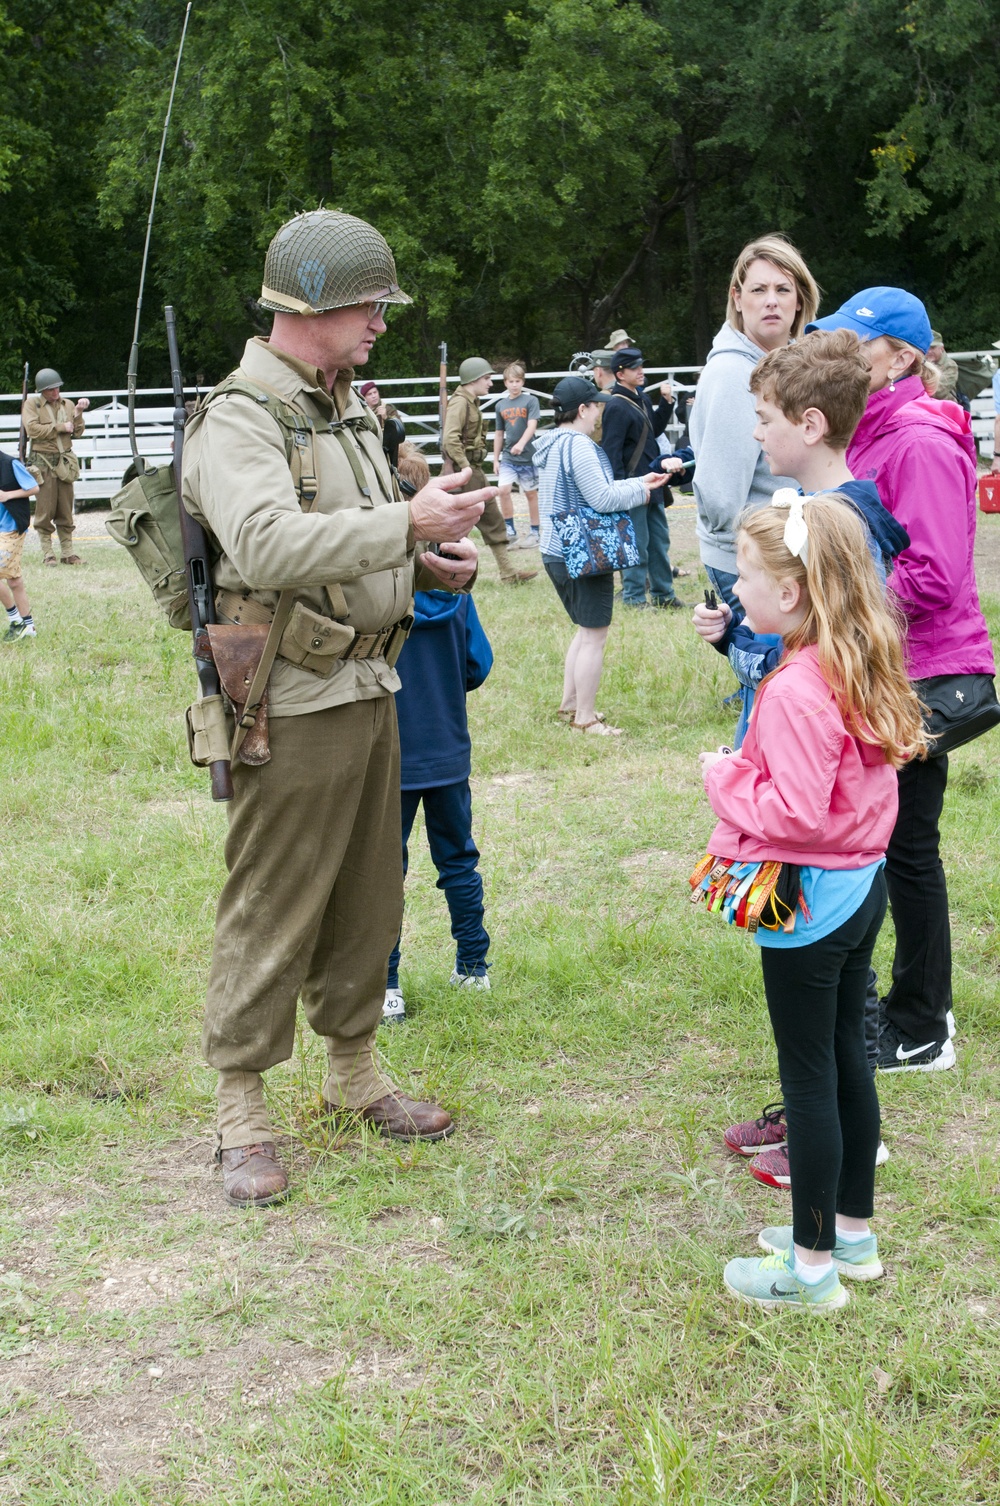 Living history honors 75th Anniversary of WWII, 100th Anniversary of 36th ID